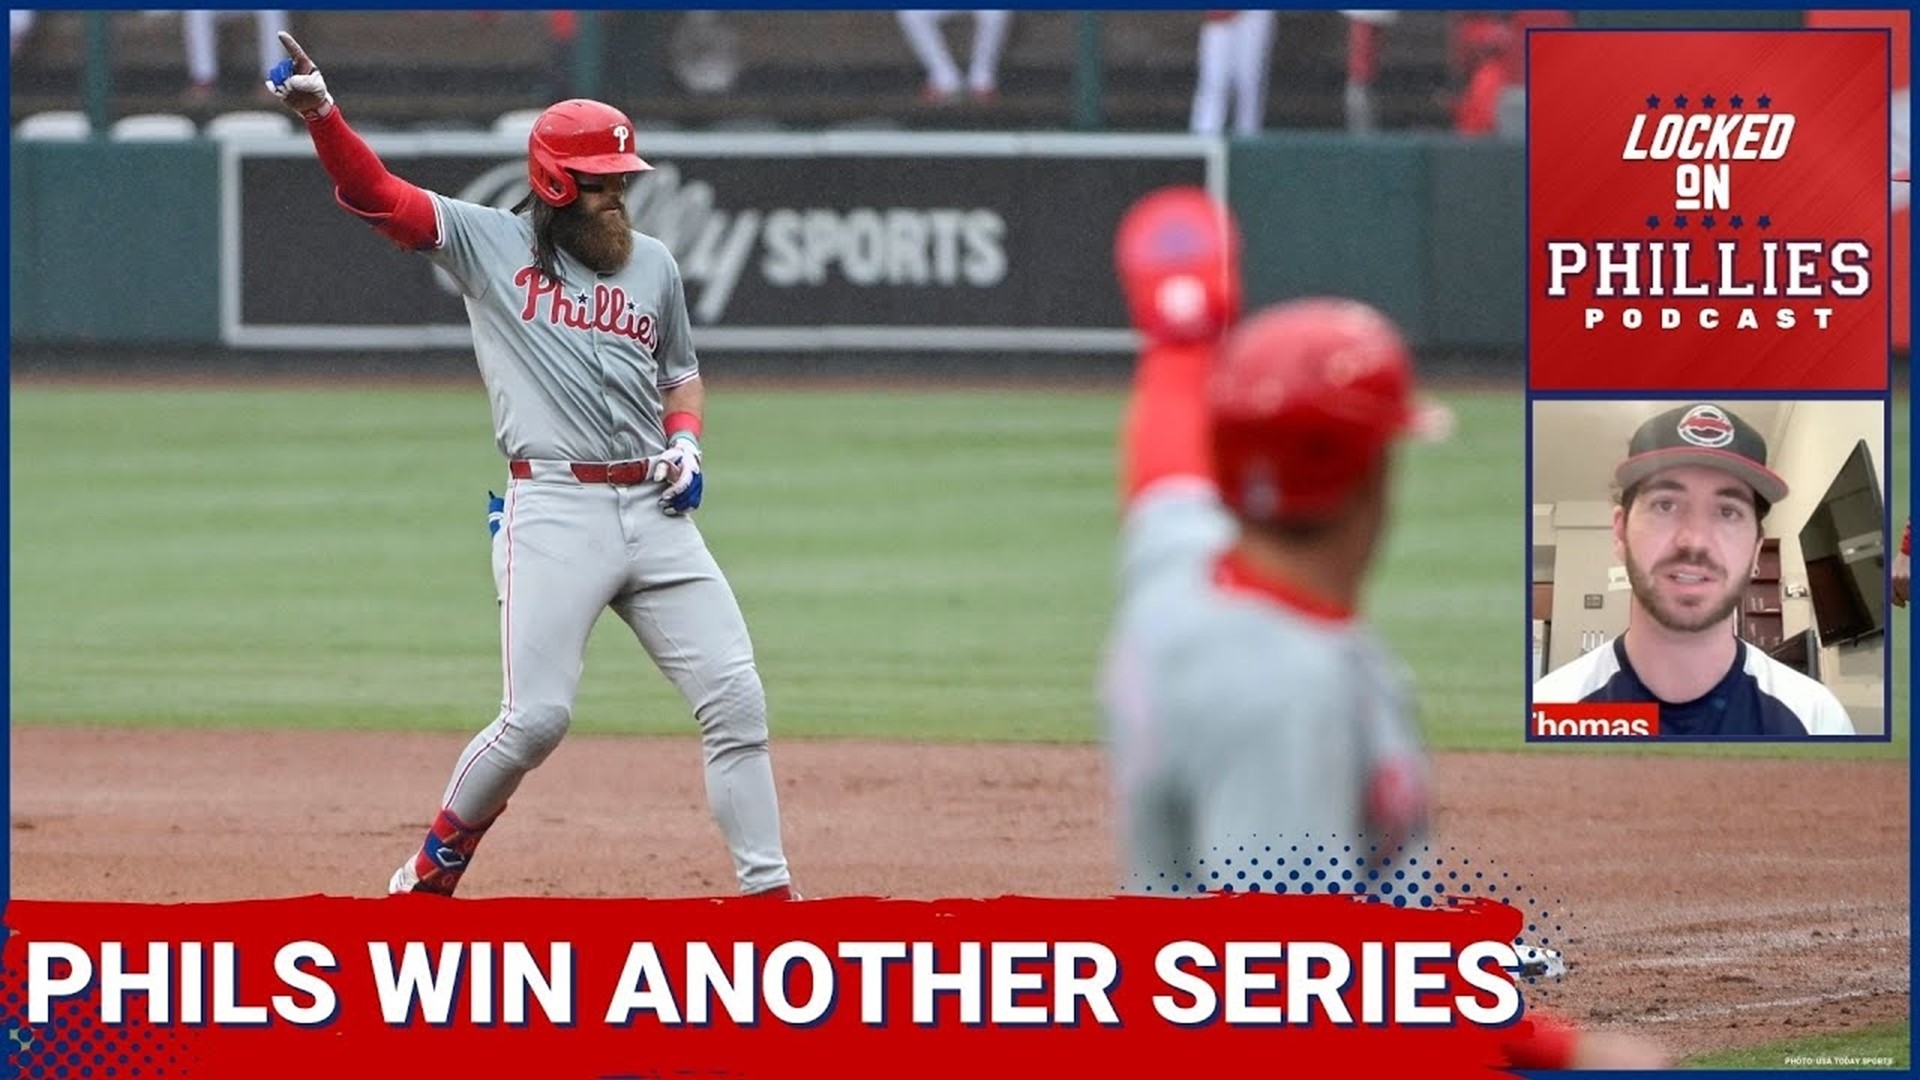 In today's episode, Connor reacts to another series win for the Philadelphia Phillies, as they take 2 of their 3 games against the St. Louis Cardinals!